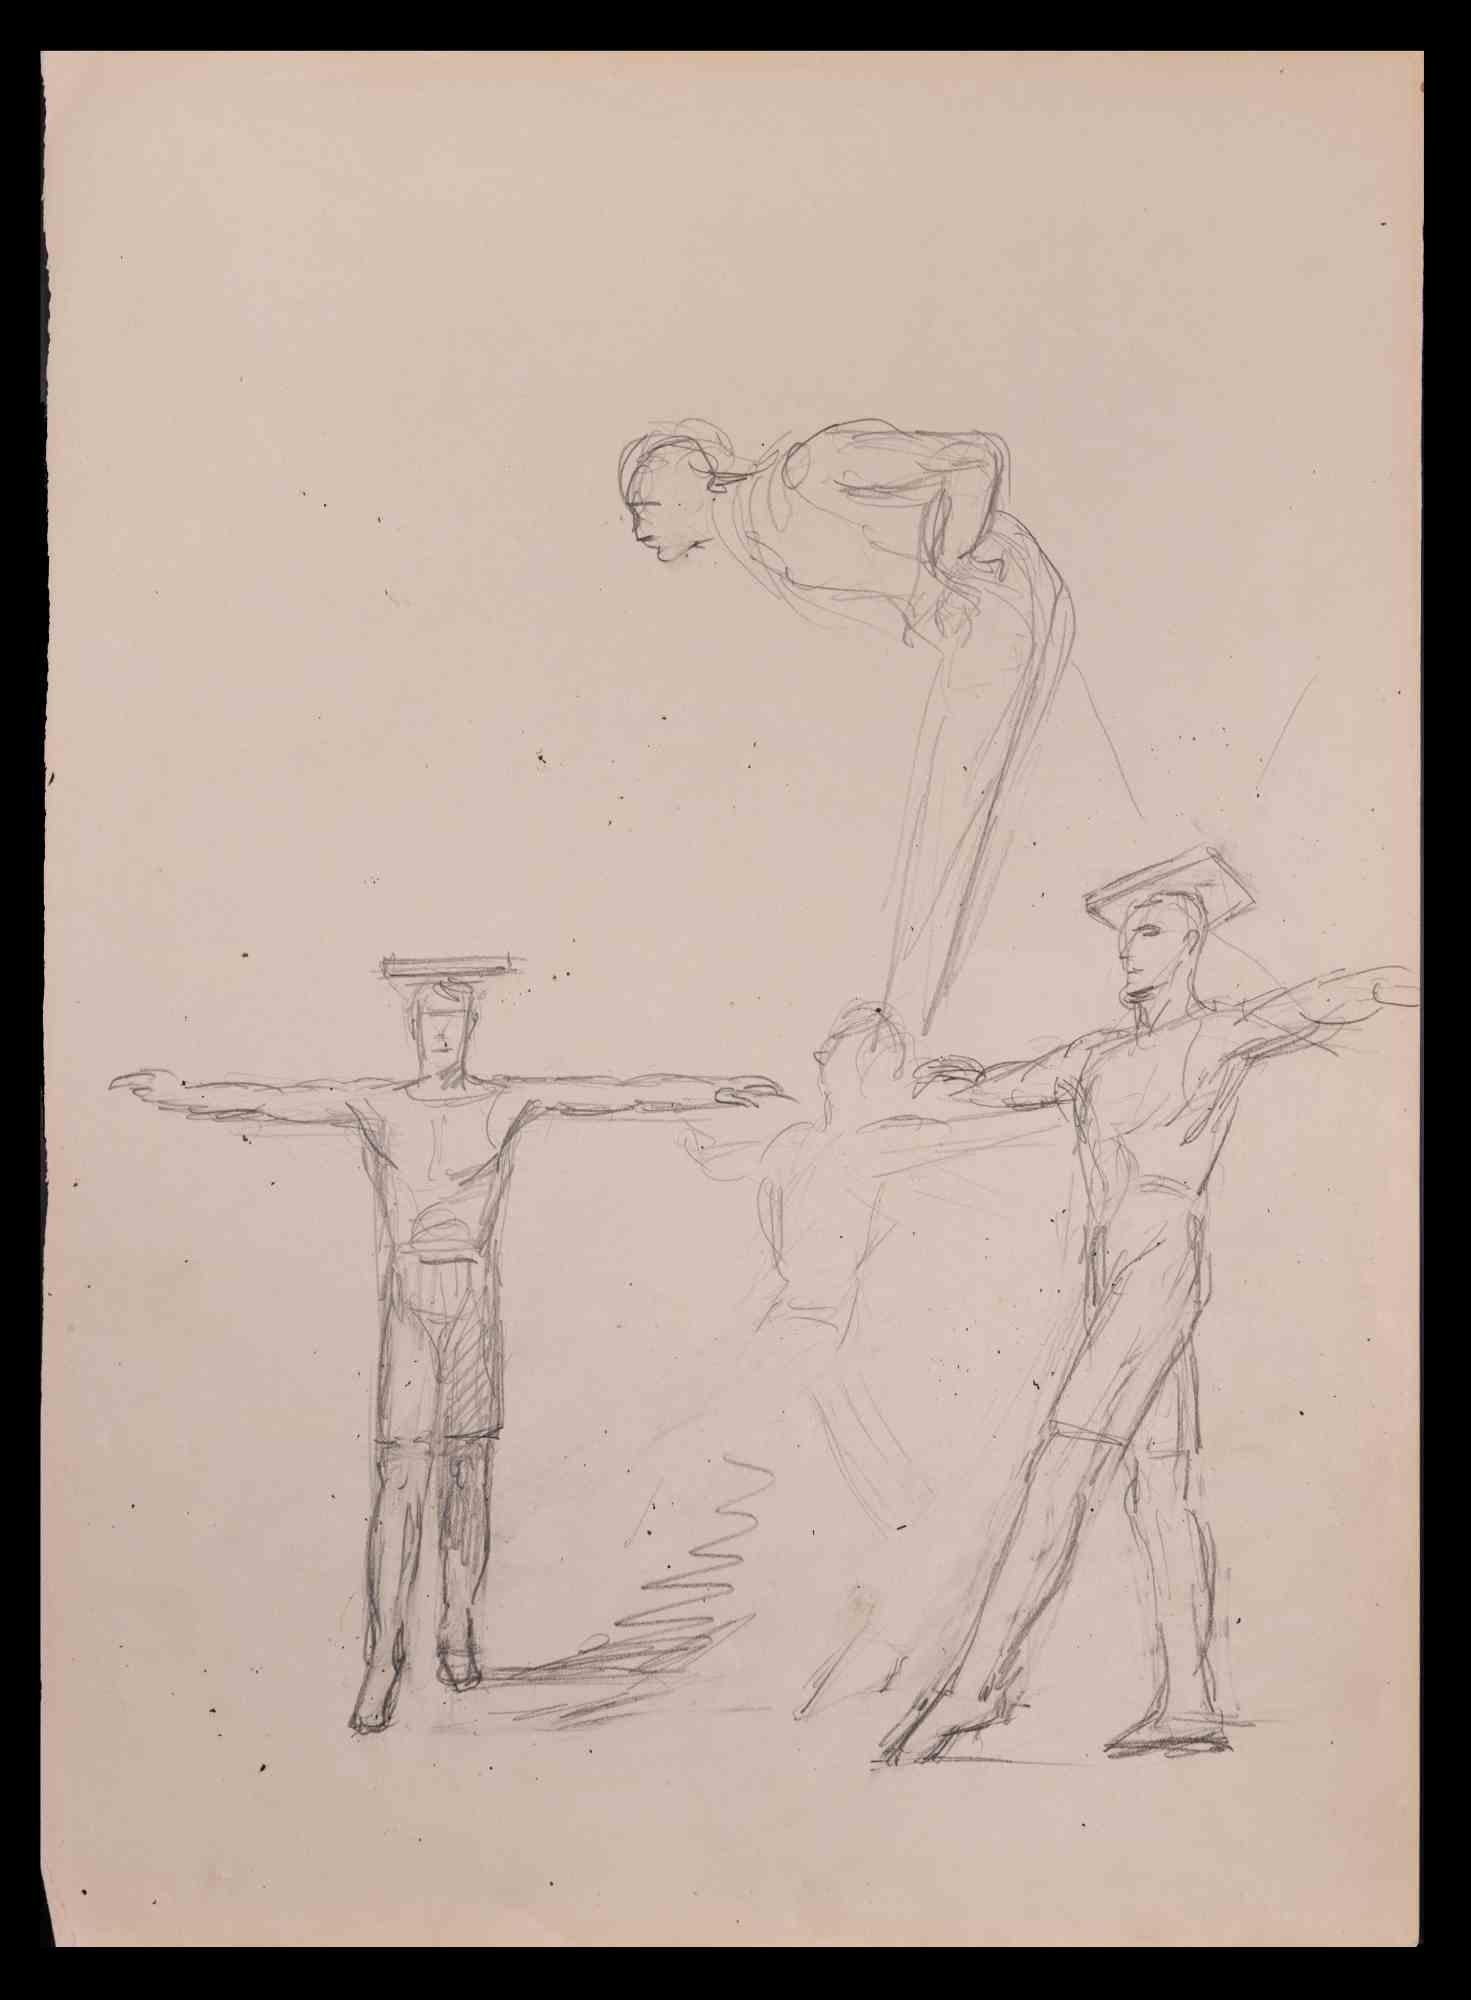 Unknown Figurative Art - The Crucified - Original Drawing - Early 20th Century